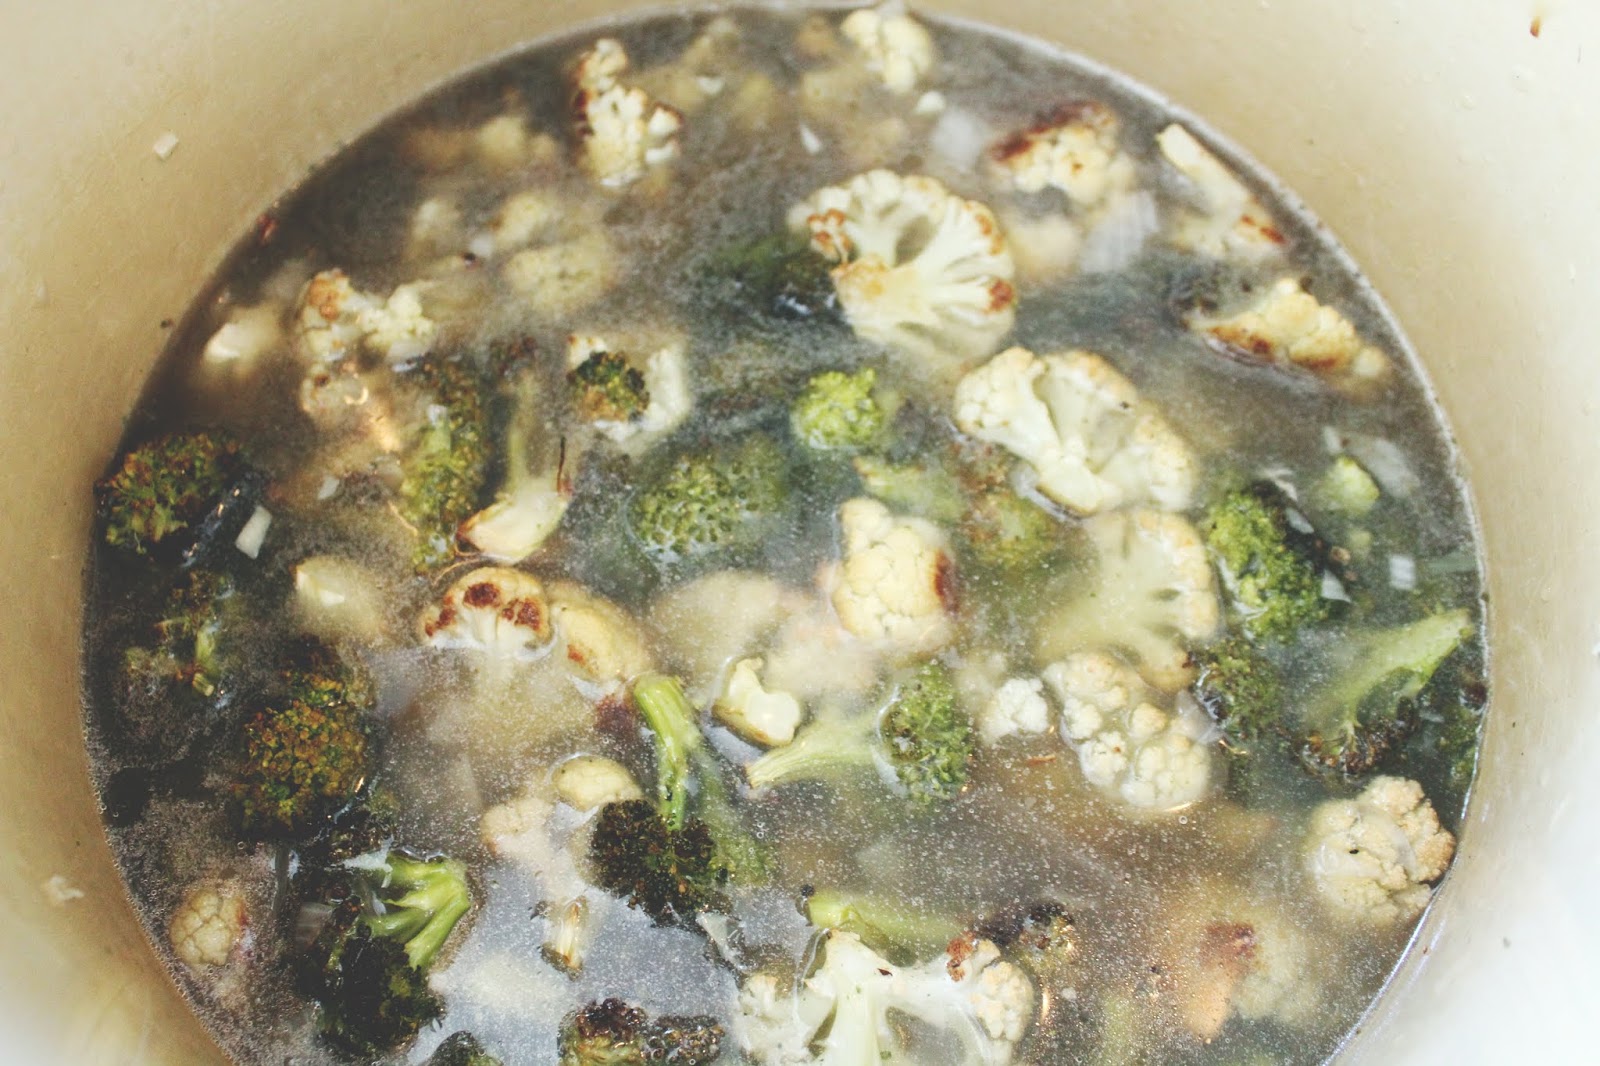 Simple, natural broccoli cheese coup with just cheese and broth and veggies